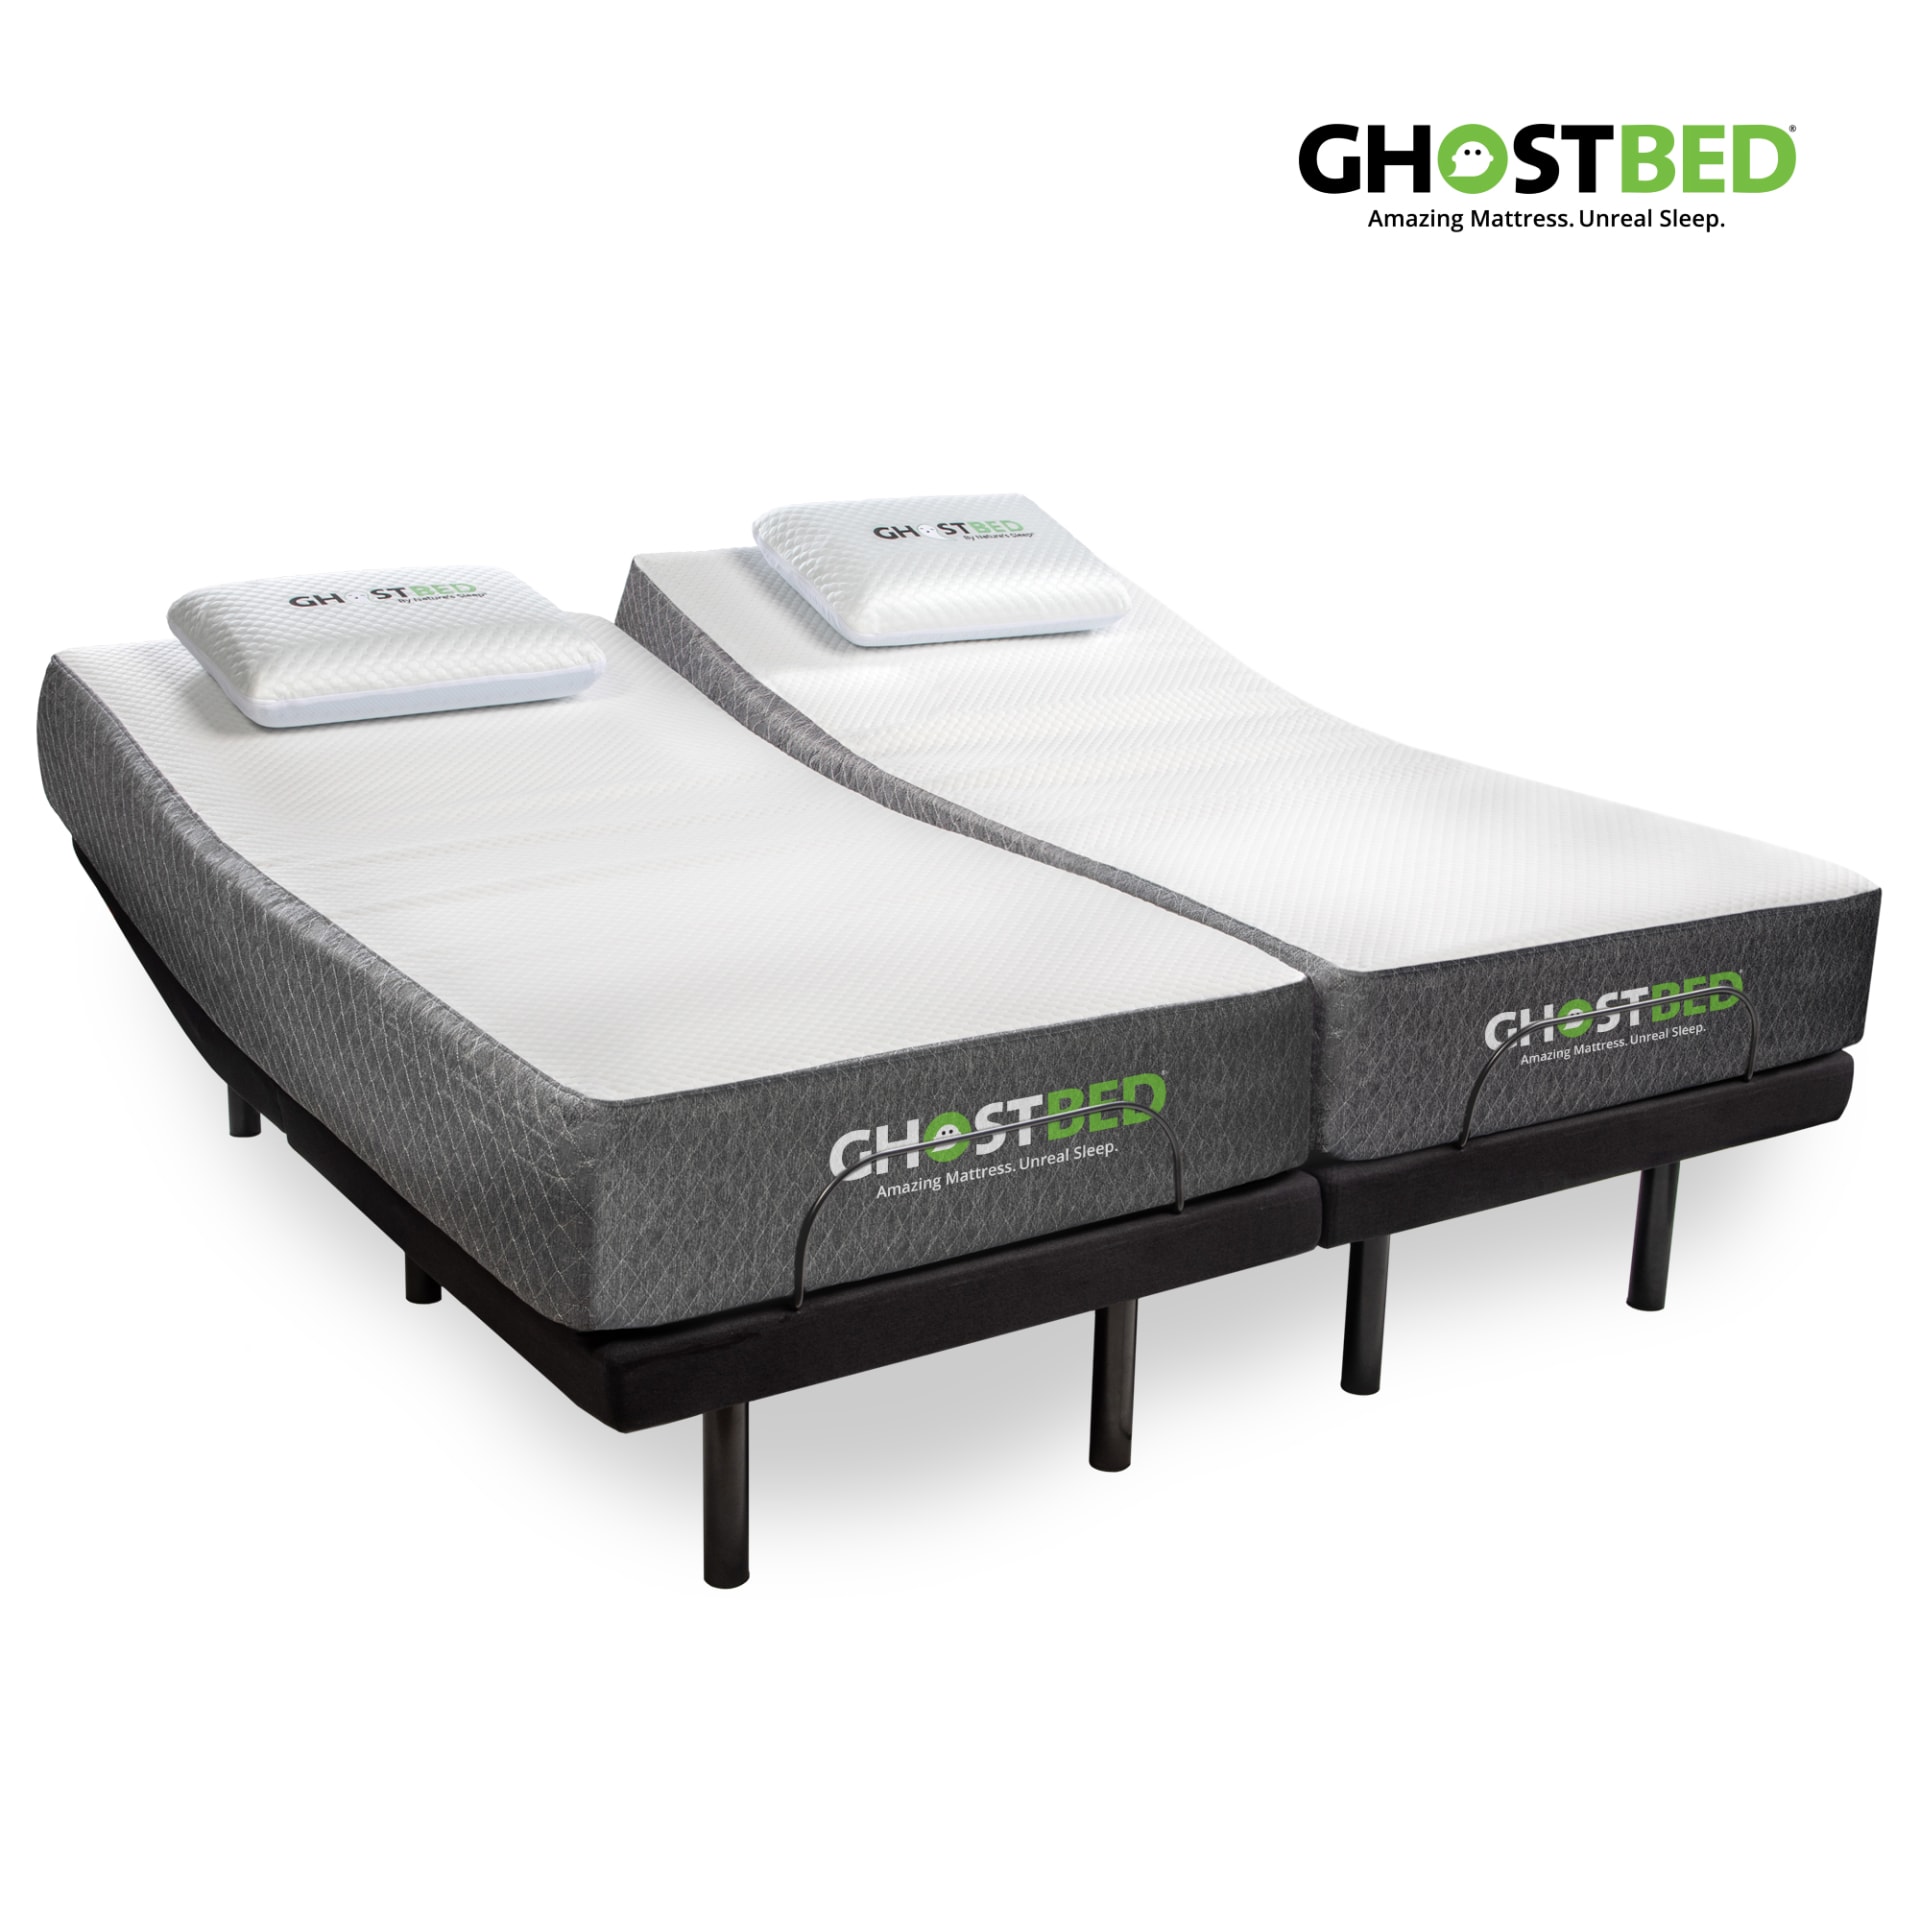 Ghostbed 11 Memory Foam Mattress With, King Size Memory Foam Bed Frame